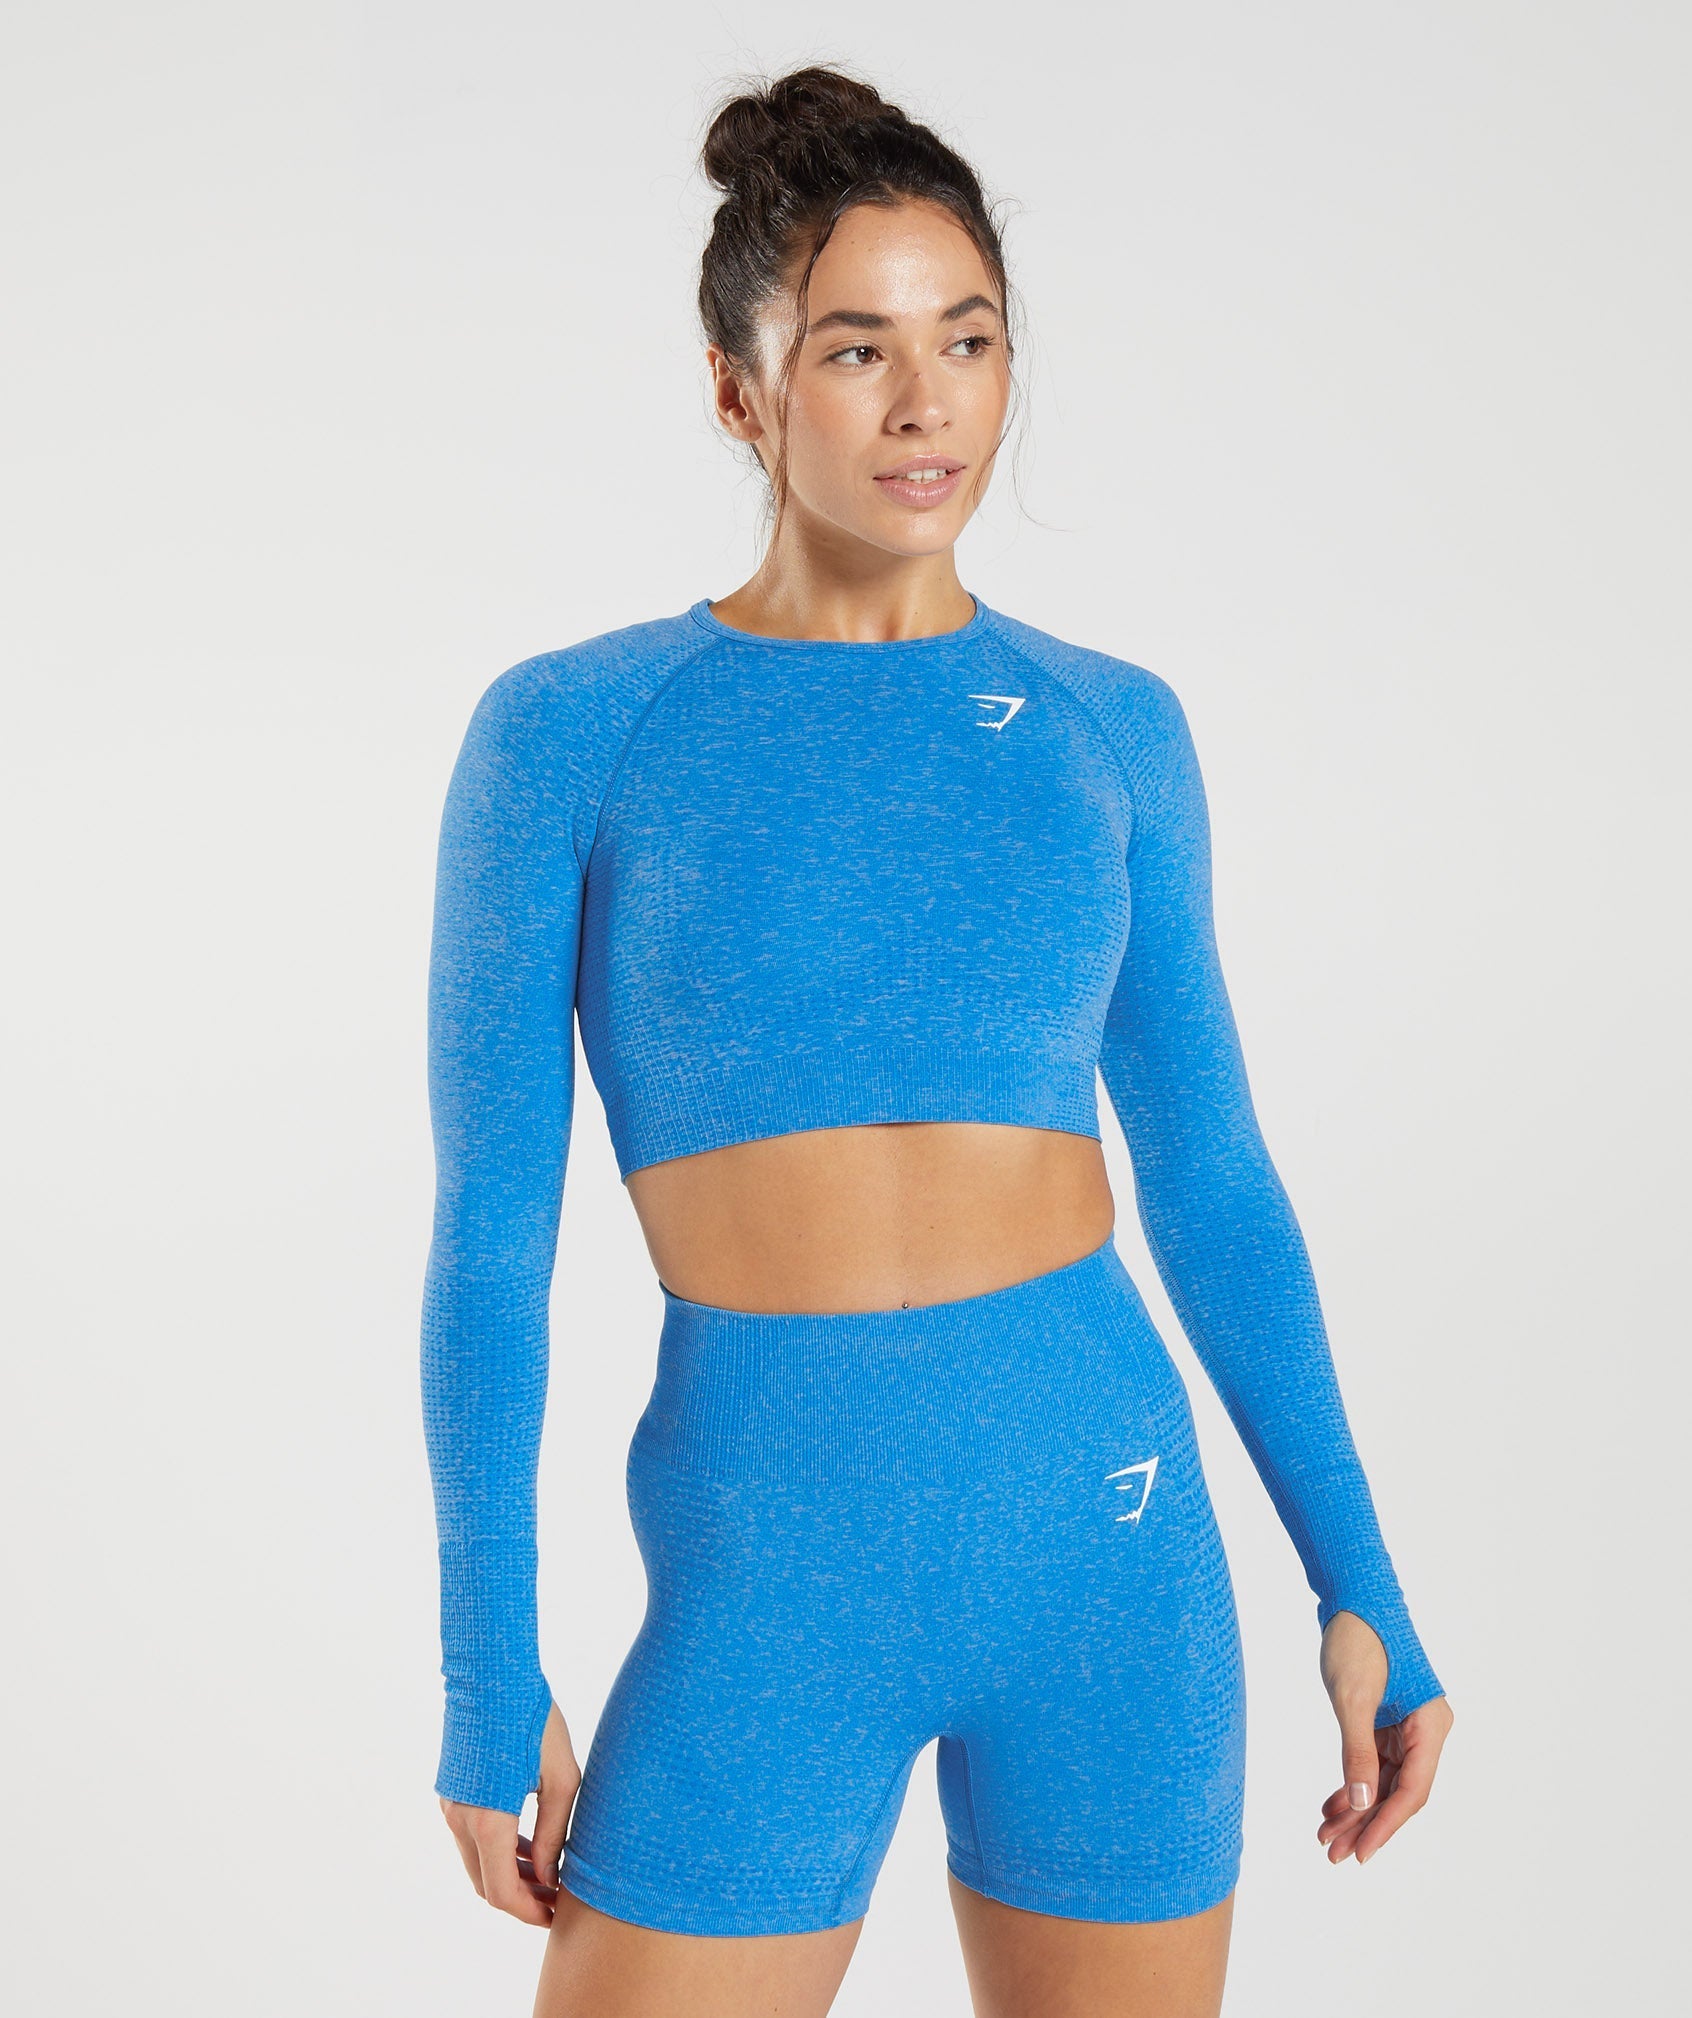 Vital Seamless 2.0 Crop Top in {{variantColor} is out of stock